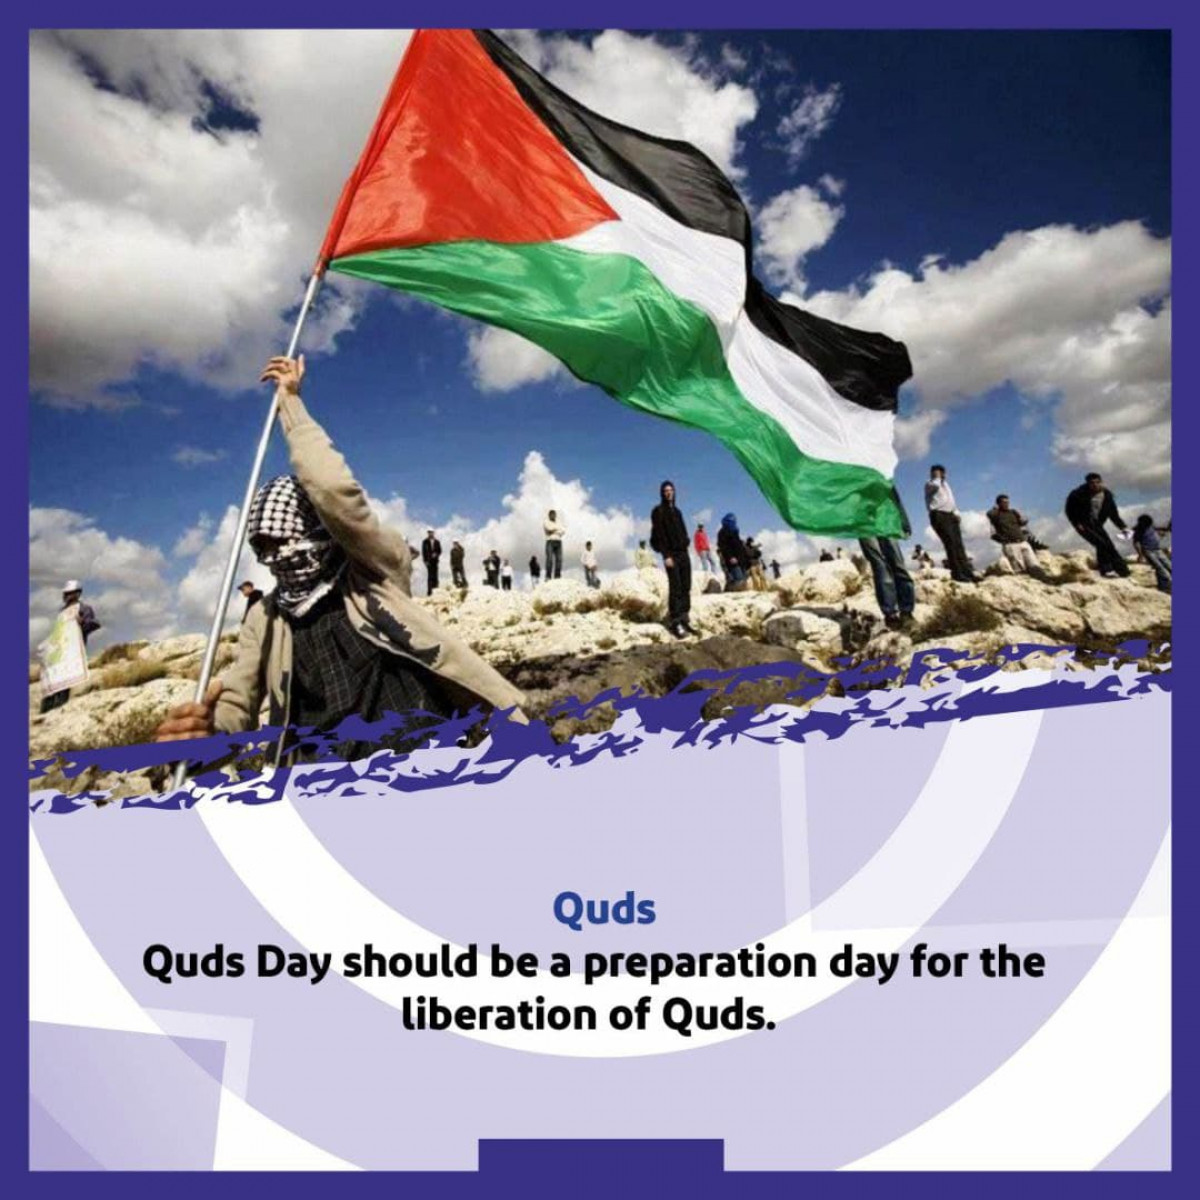 Quds Day should be a preparation day for the liberation of Quds